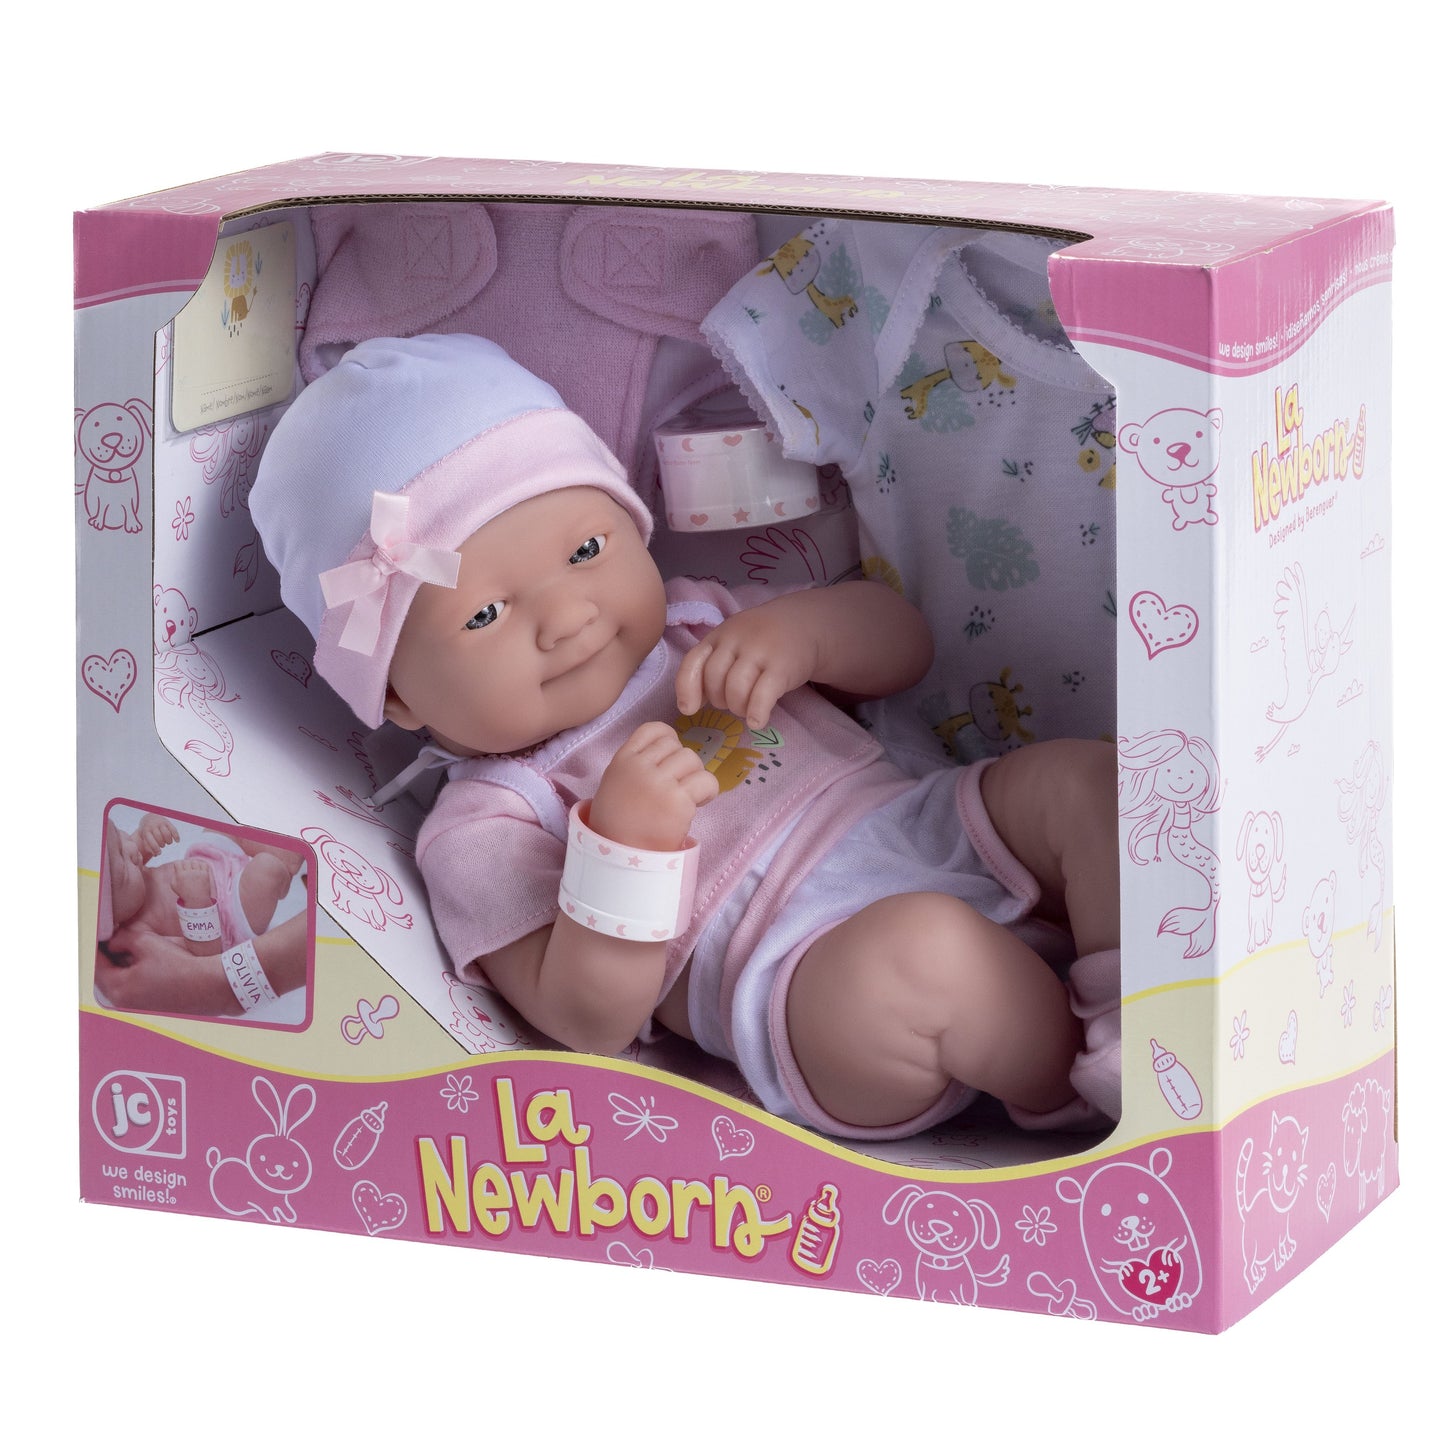 JC Toys, La Newborn Nursery 8 piece Layette Pink Baby Doll Gift Set 14 inch Lifelike Smiling Doll-Accessories-Ages 2+